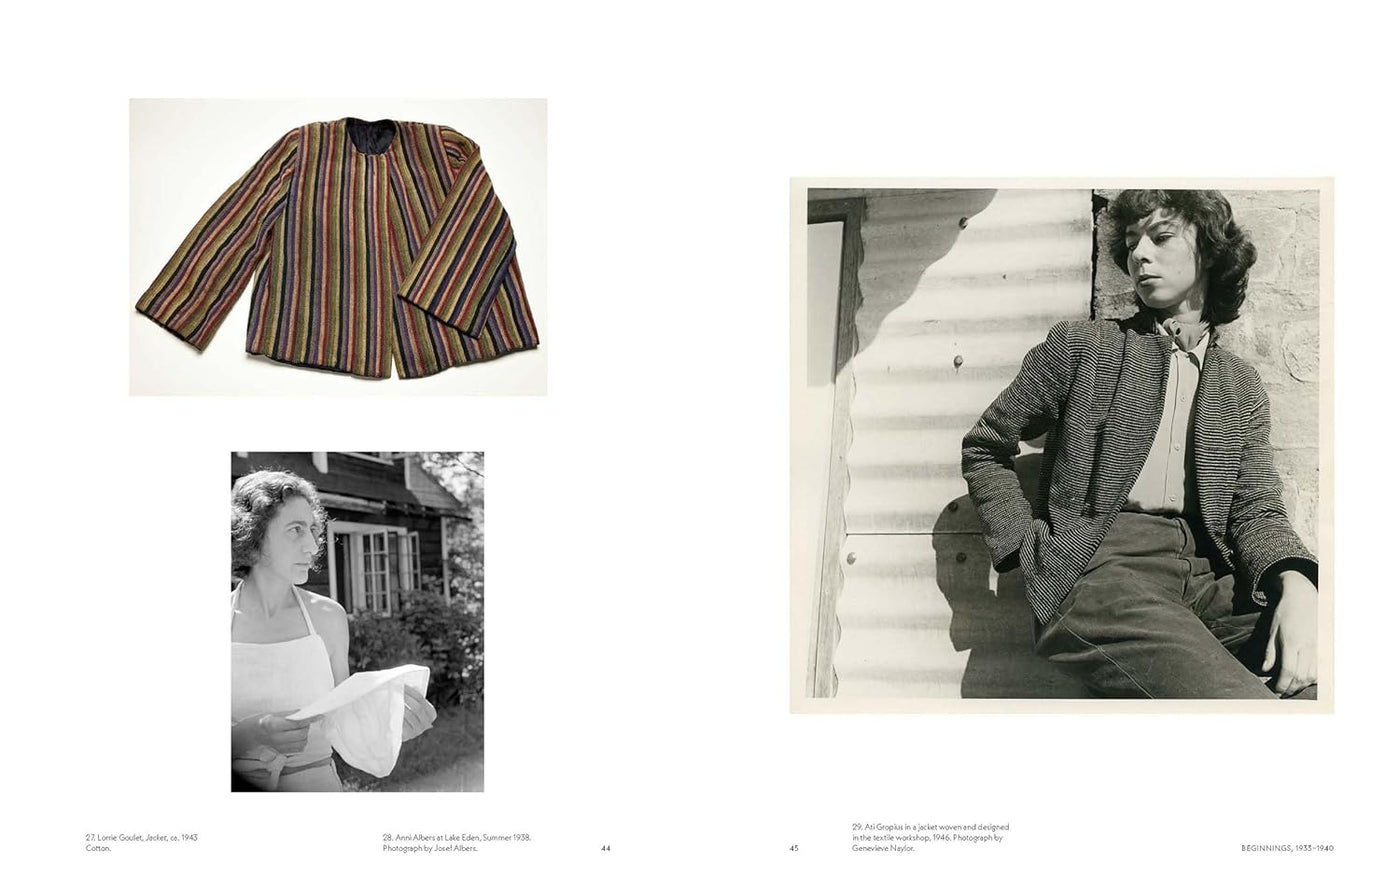 Weaving at Black Mountain College: Anni Albers, Trude Guermonprez, and Their Students}